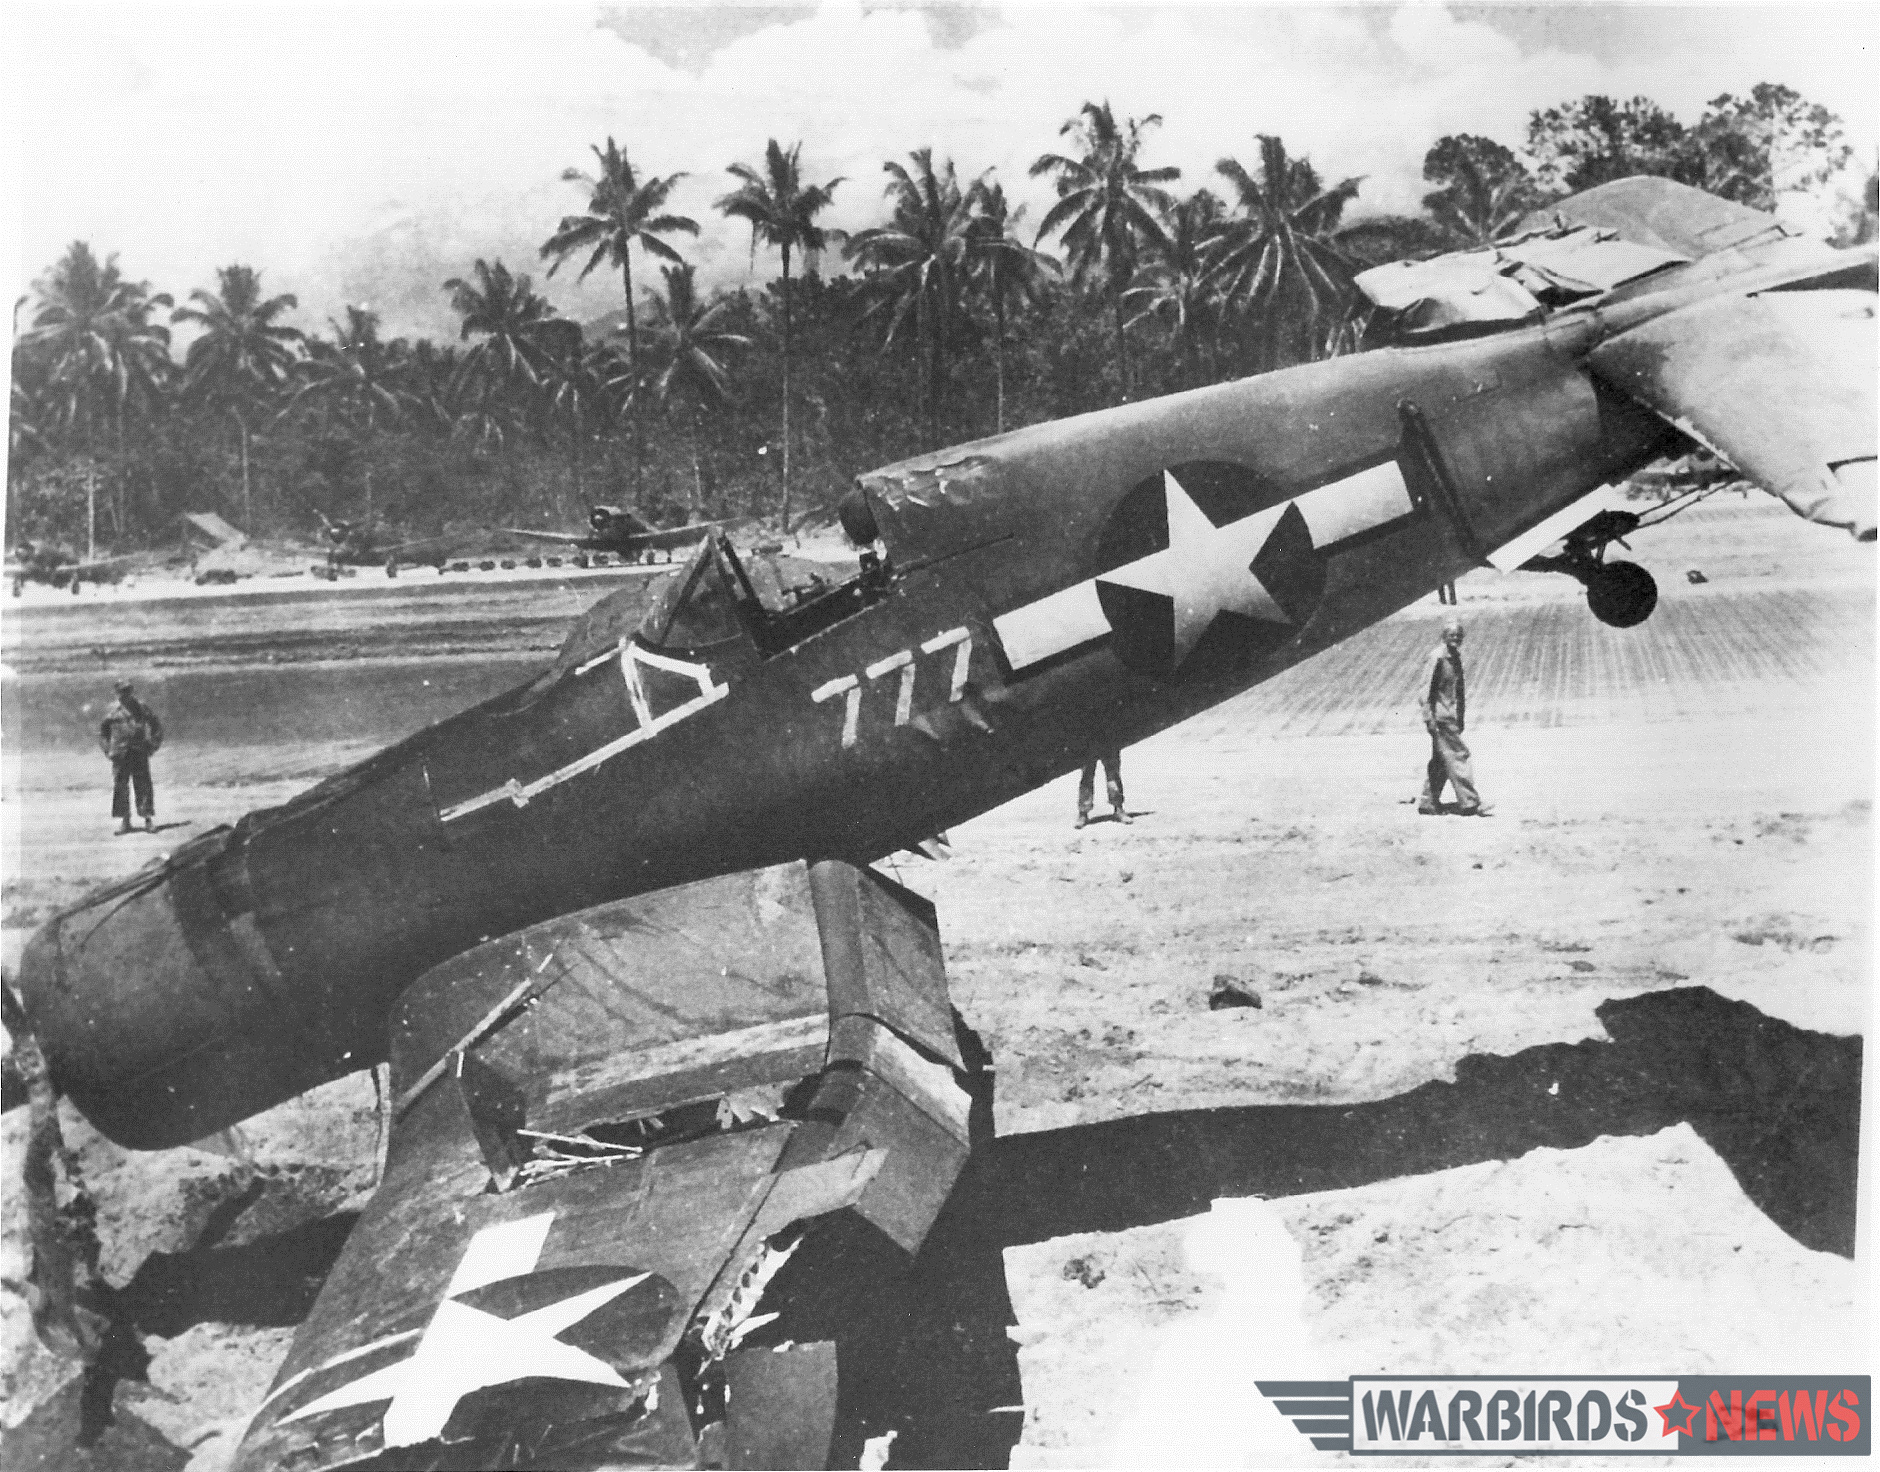 Even when conditions were ideal, putting the high-performance Corsair down on a narrow runway of pierced steel planking could lead to trouble. If a pilot strayed off the edge of the paved runway and hooked a wheel in the soft shoulder, the result was often a sudden flip upside down. Black Sheep pilot Denmark Groover had the distinction of overturning two Corsairs—but he walked away from both accidents, including this one in “lucky” side number 777. Photo credit: Bruce Gamble collection via National Archives